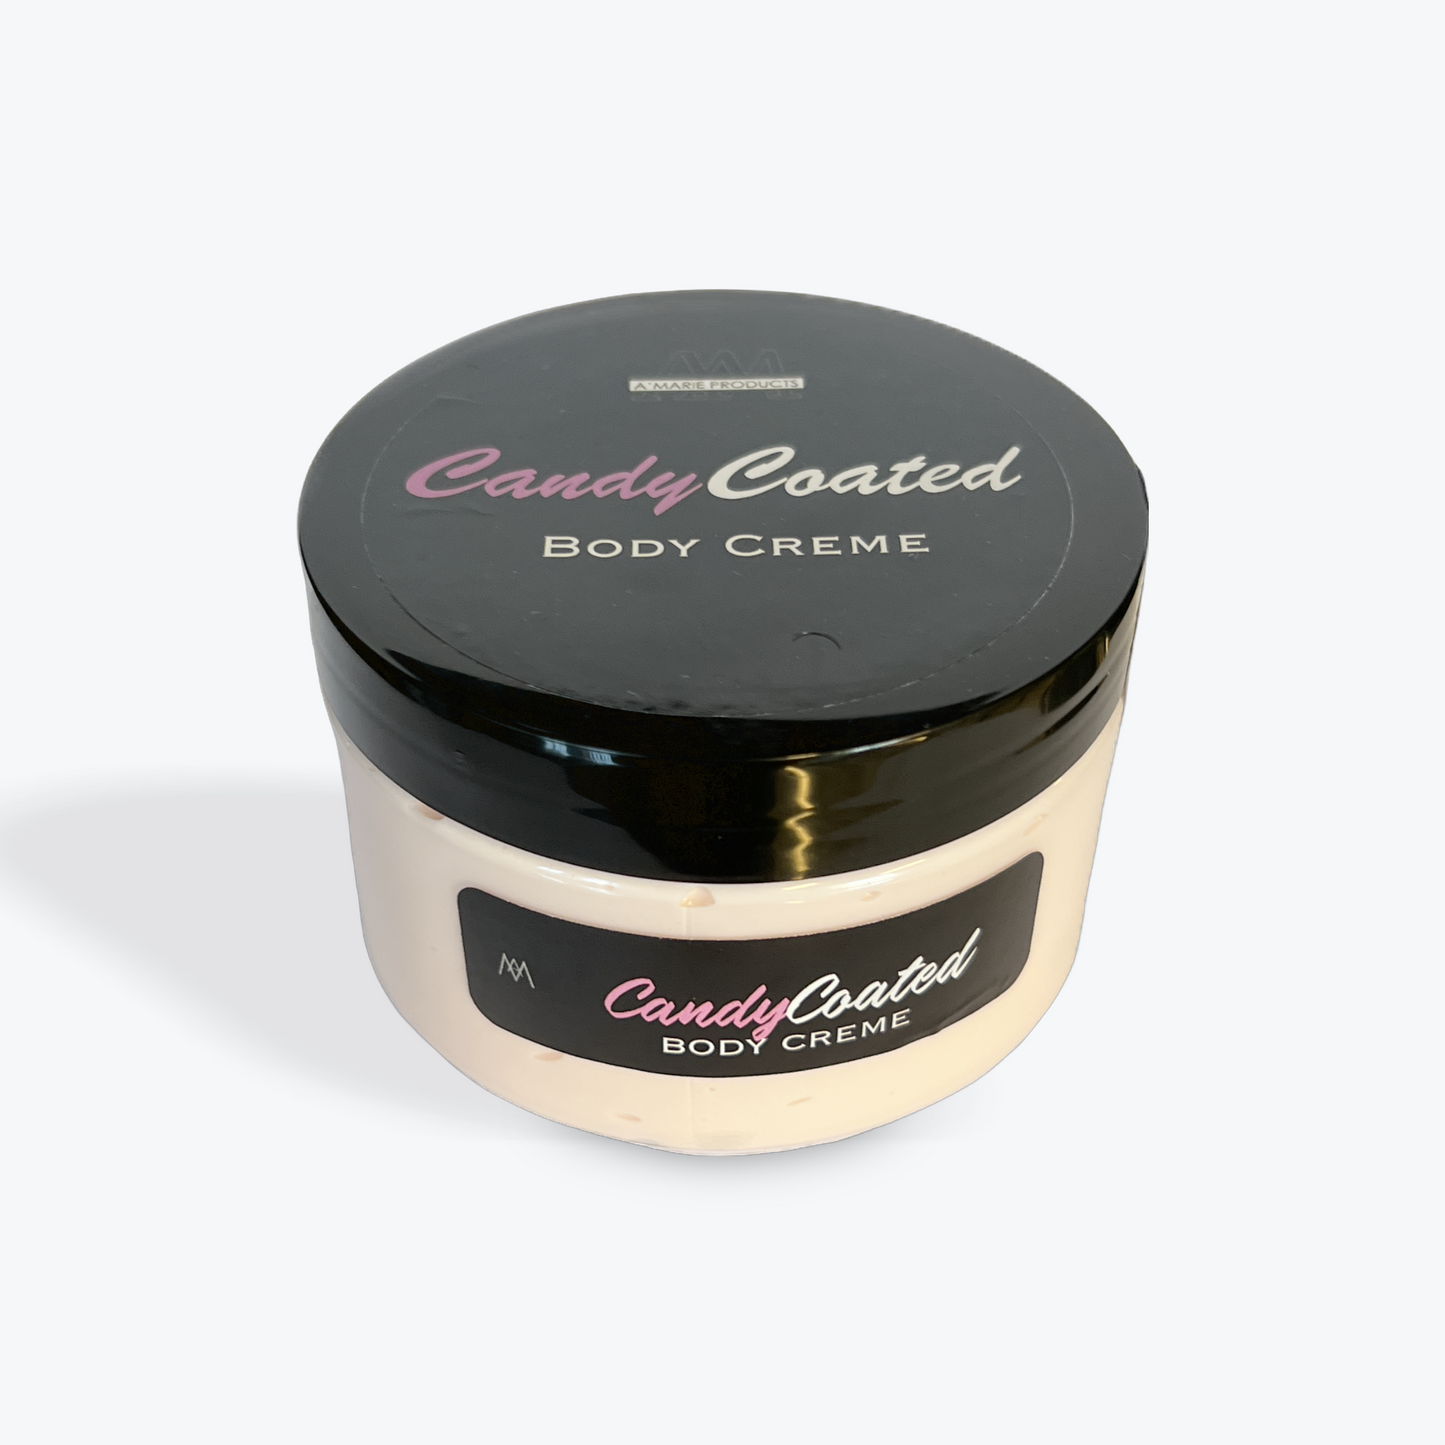 Candy Coated Body Creme